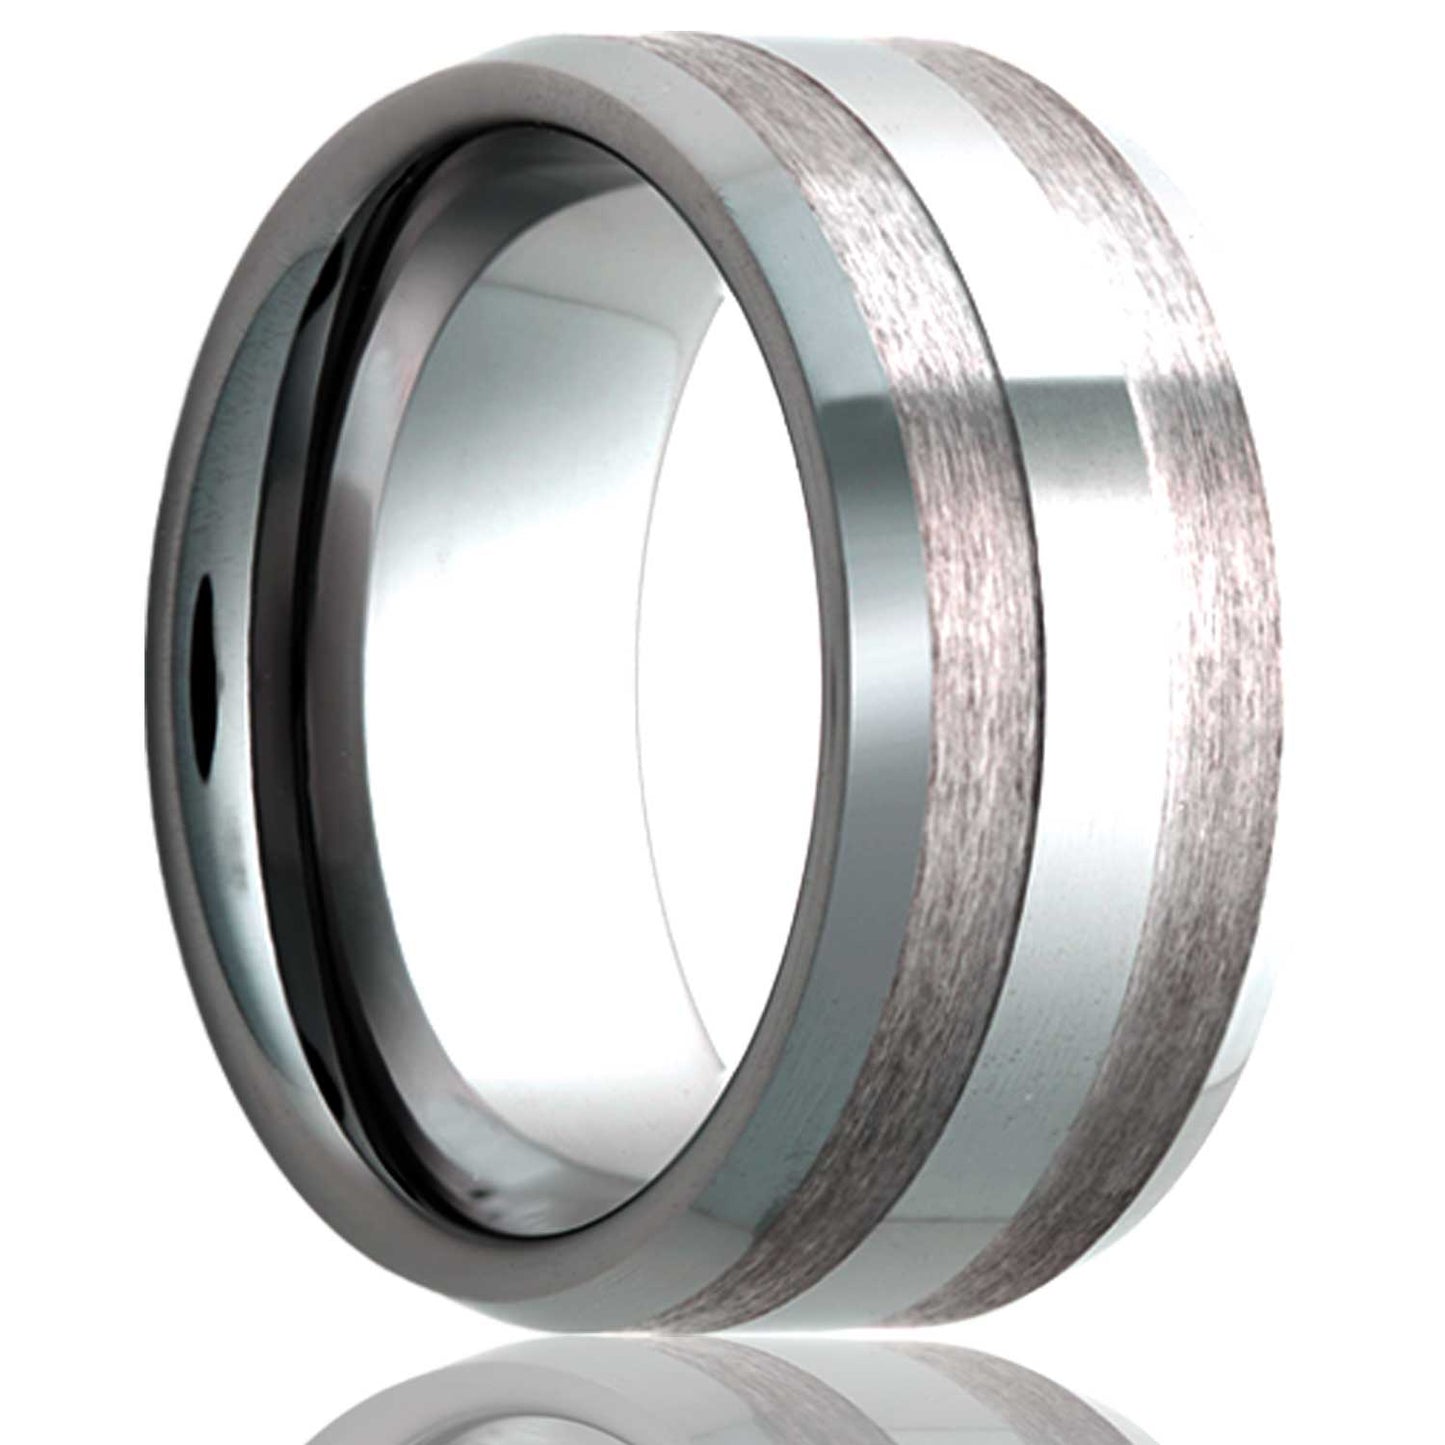 A satin finish tungsten wedding band with polished center & beveled edges displayed on a neutral white background.